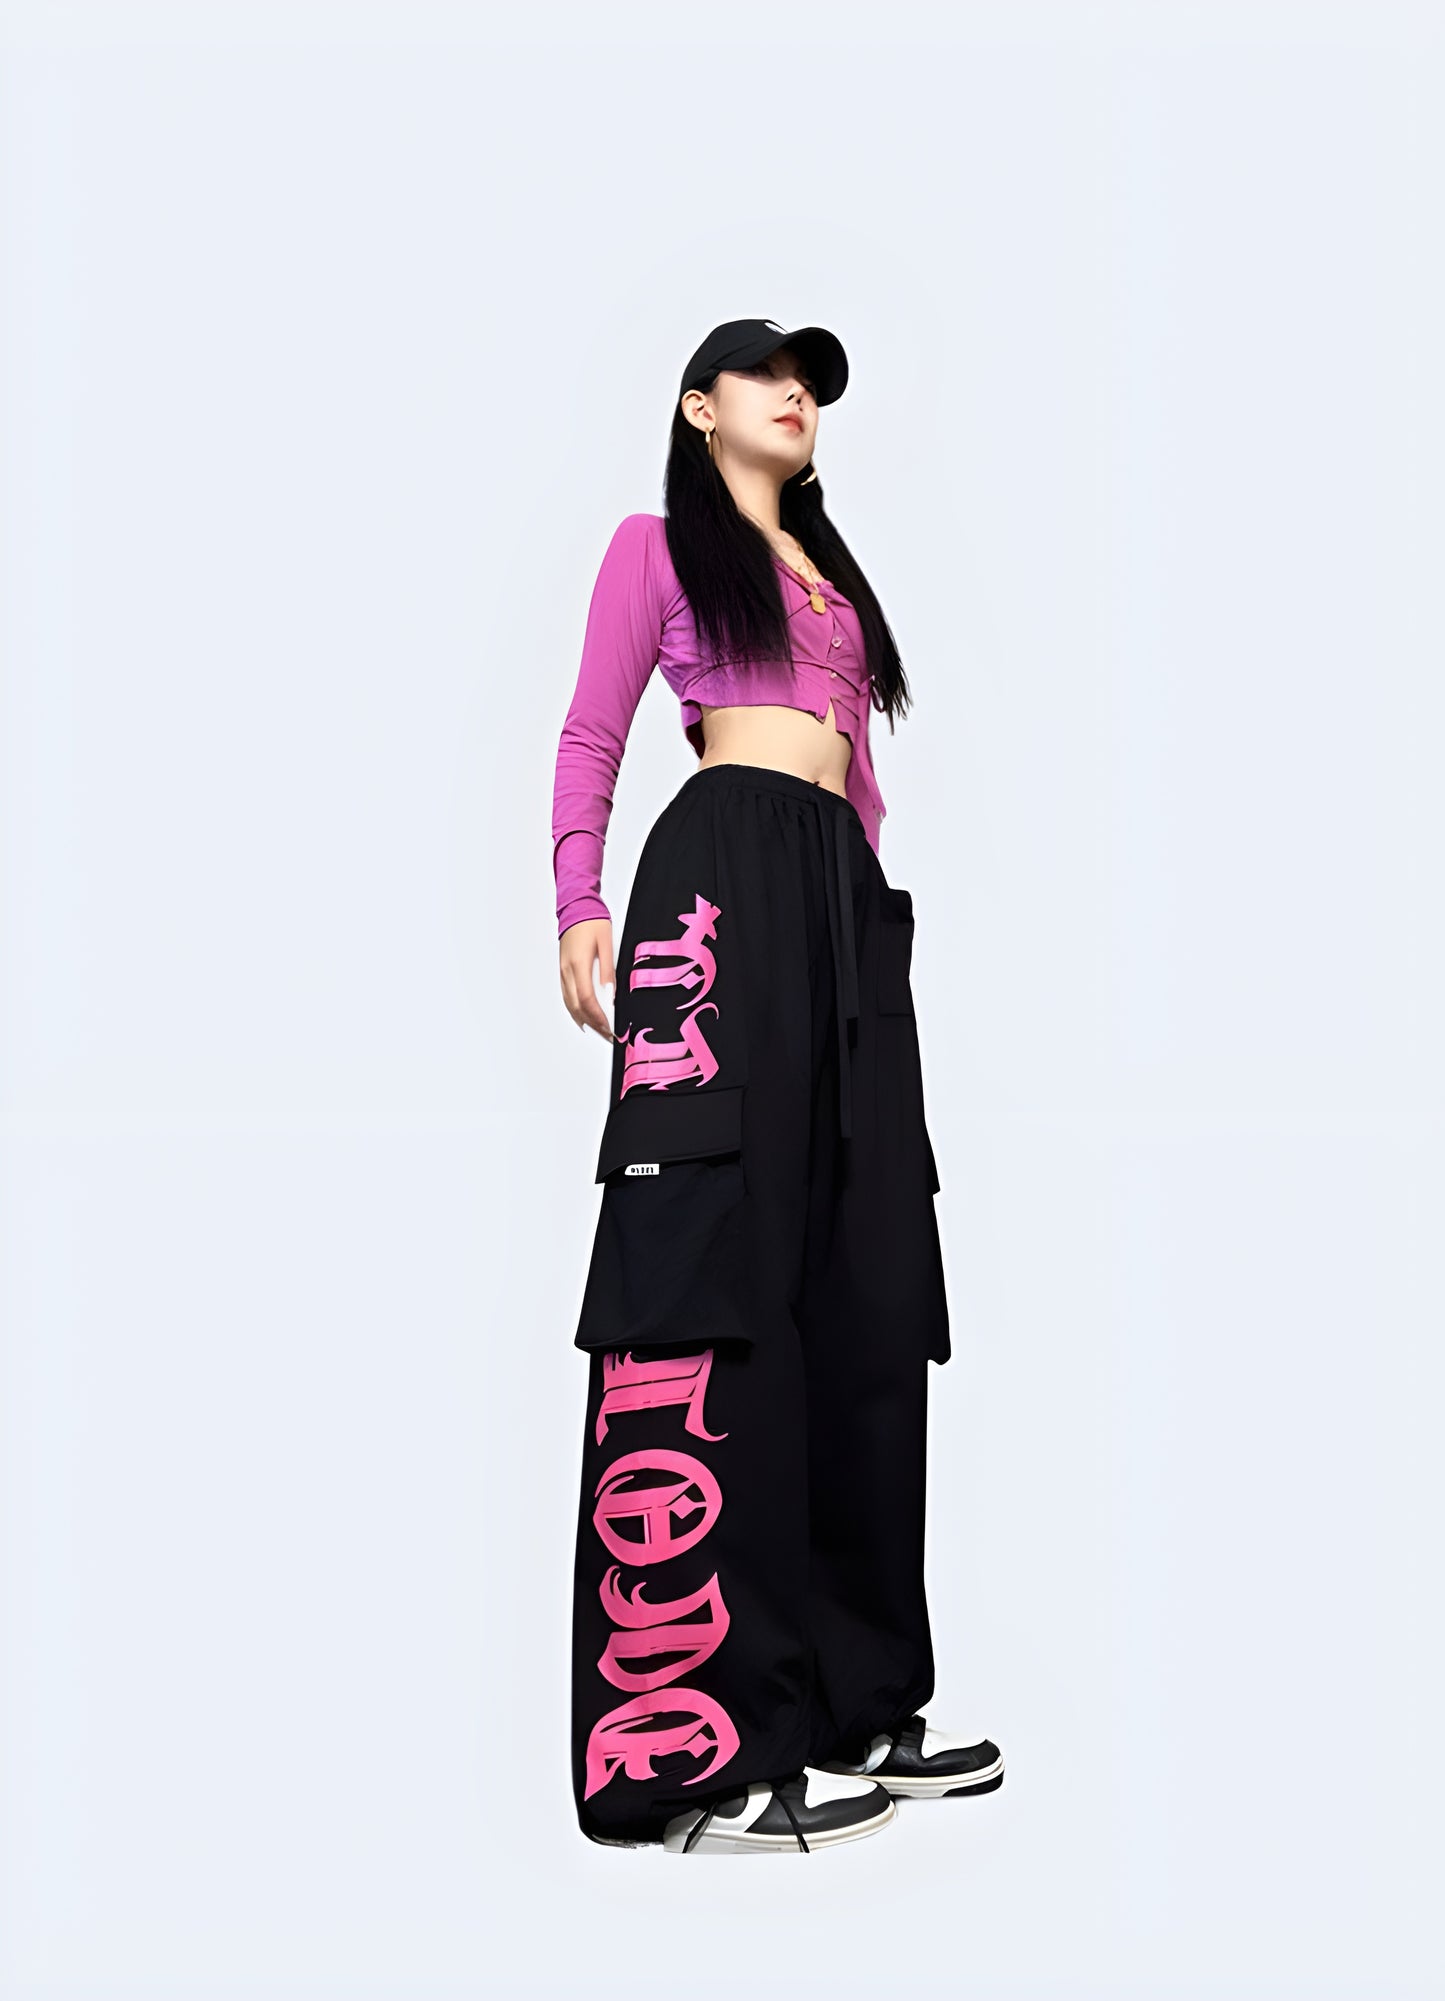 Conquer adventures in style black & pink cargo pants durable, comfy, loaded with pockets.